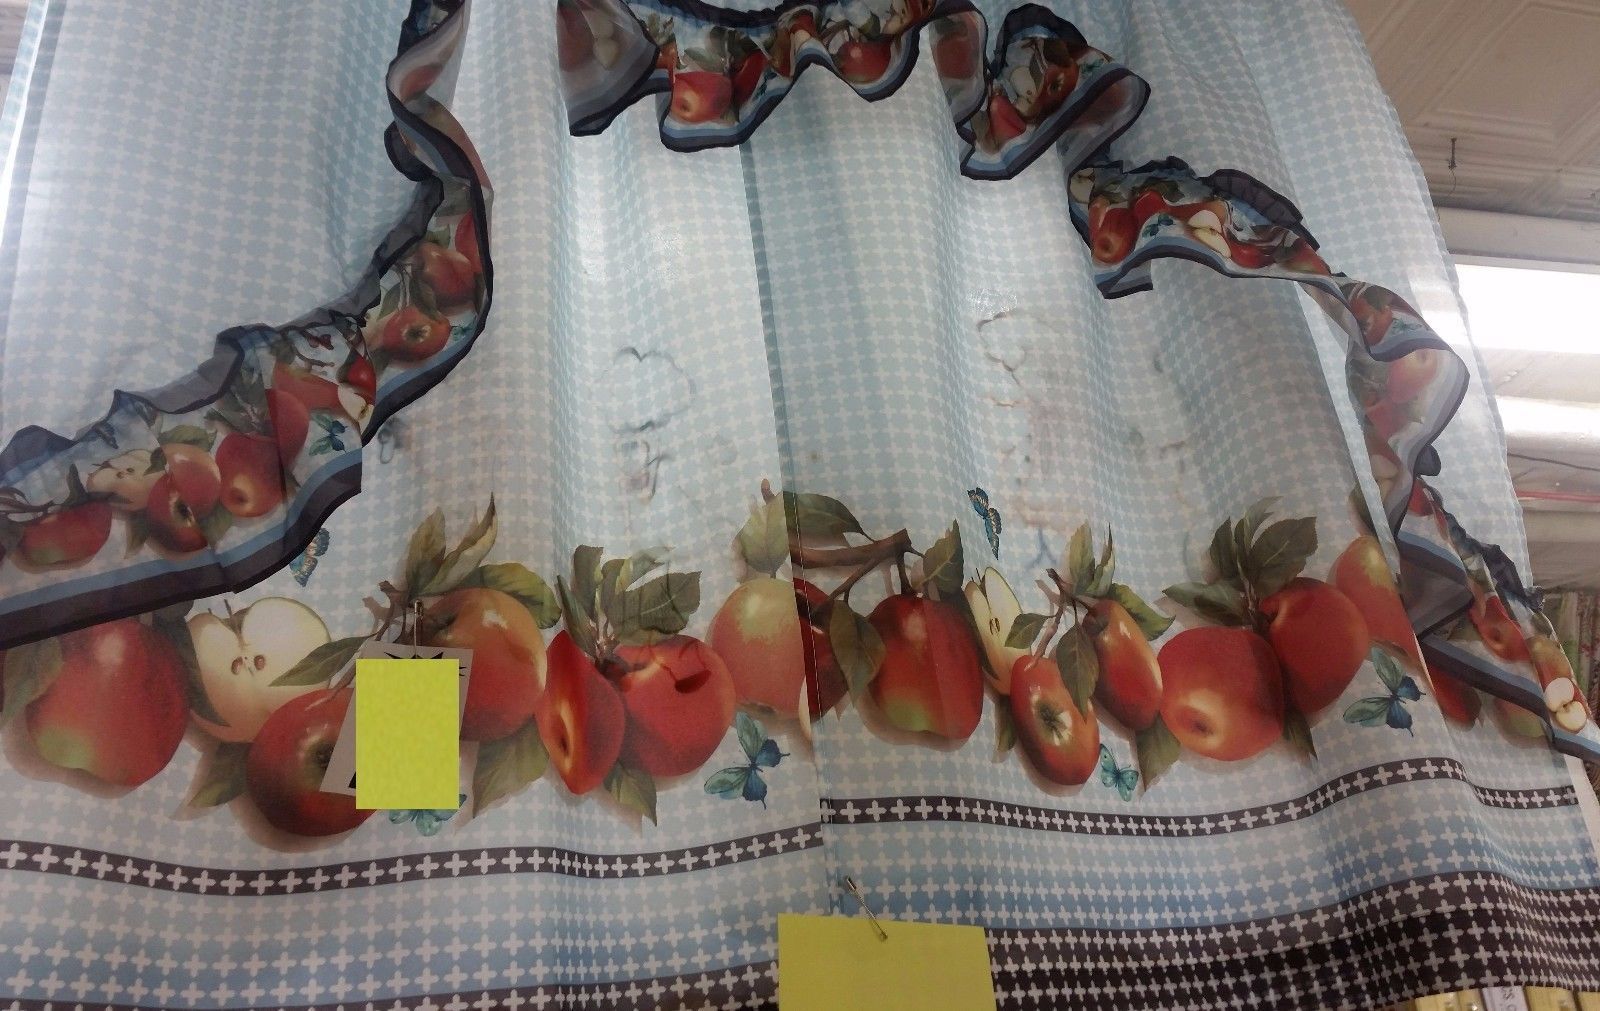 3 Pc Curtains Set: 2 Tiers & Swag (57"x30") And 18 Similar Items Throughout Delicious Apples Kitchen Curtain Tier And Valance Sets (View 20 of 20)